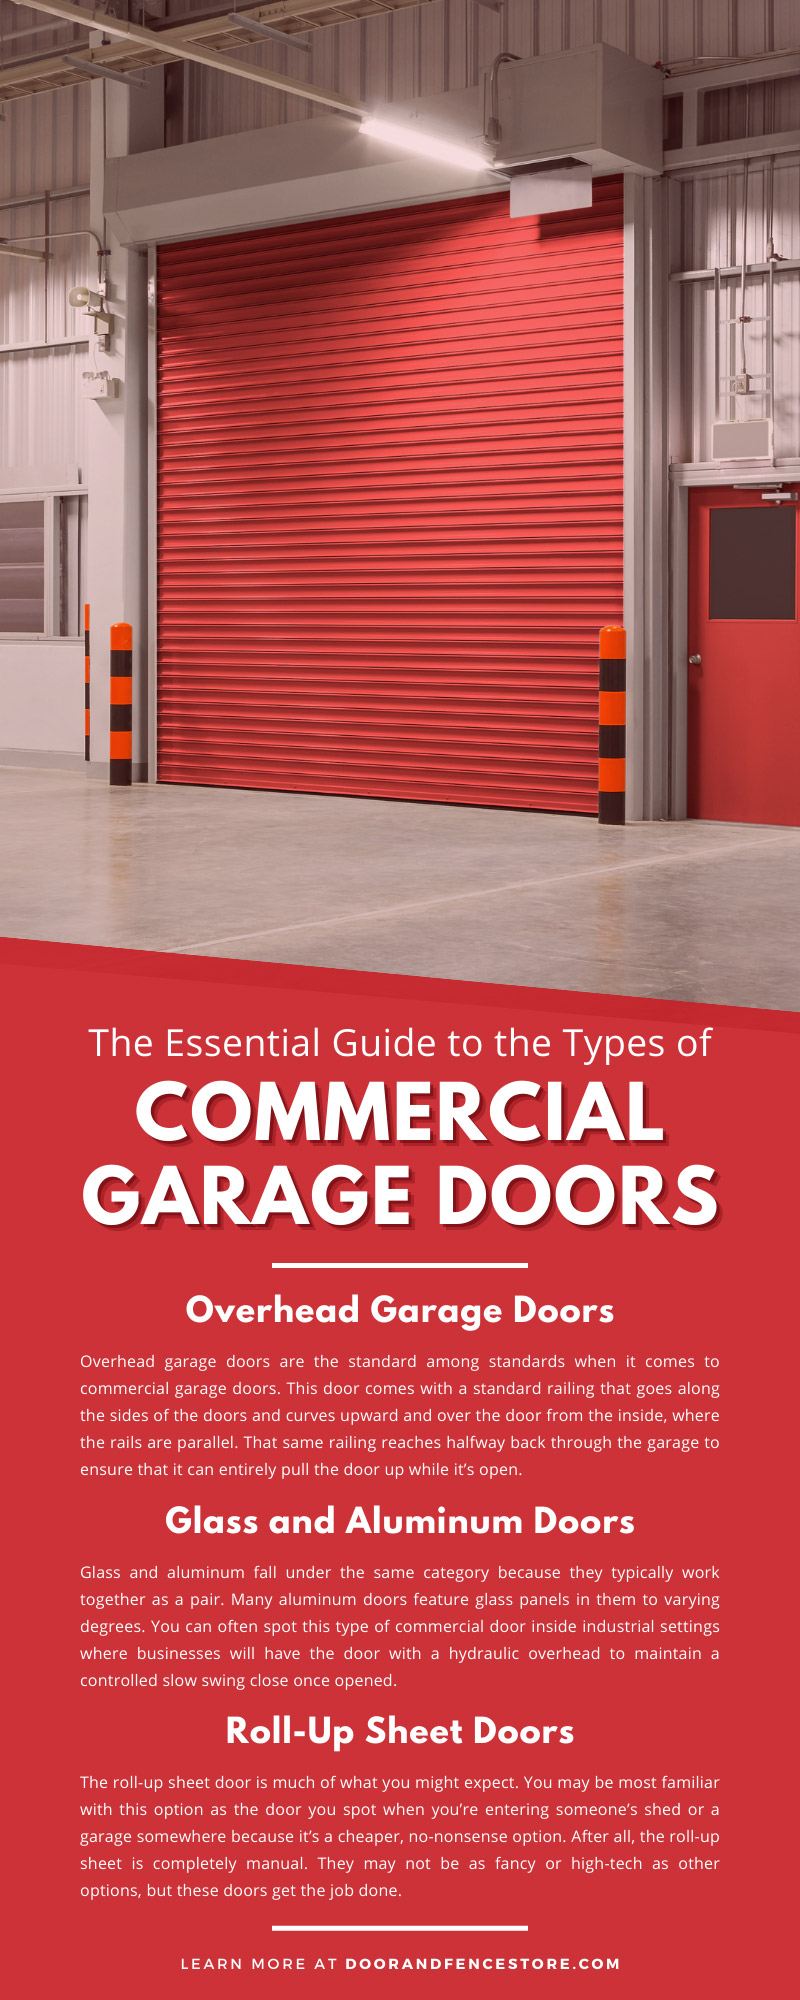 The Essential Guide to the Types of Commercial Garage Doors
